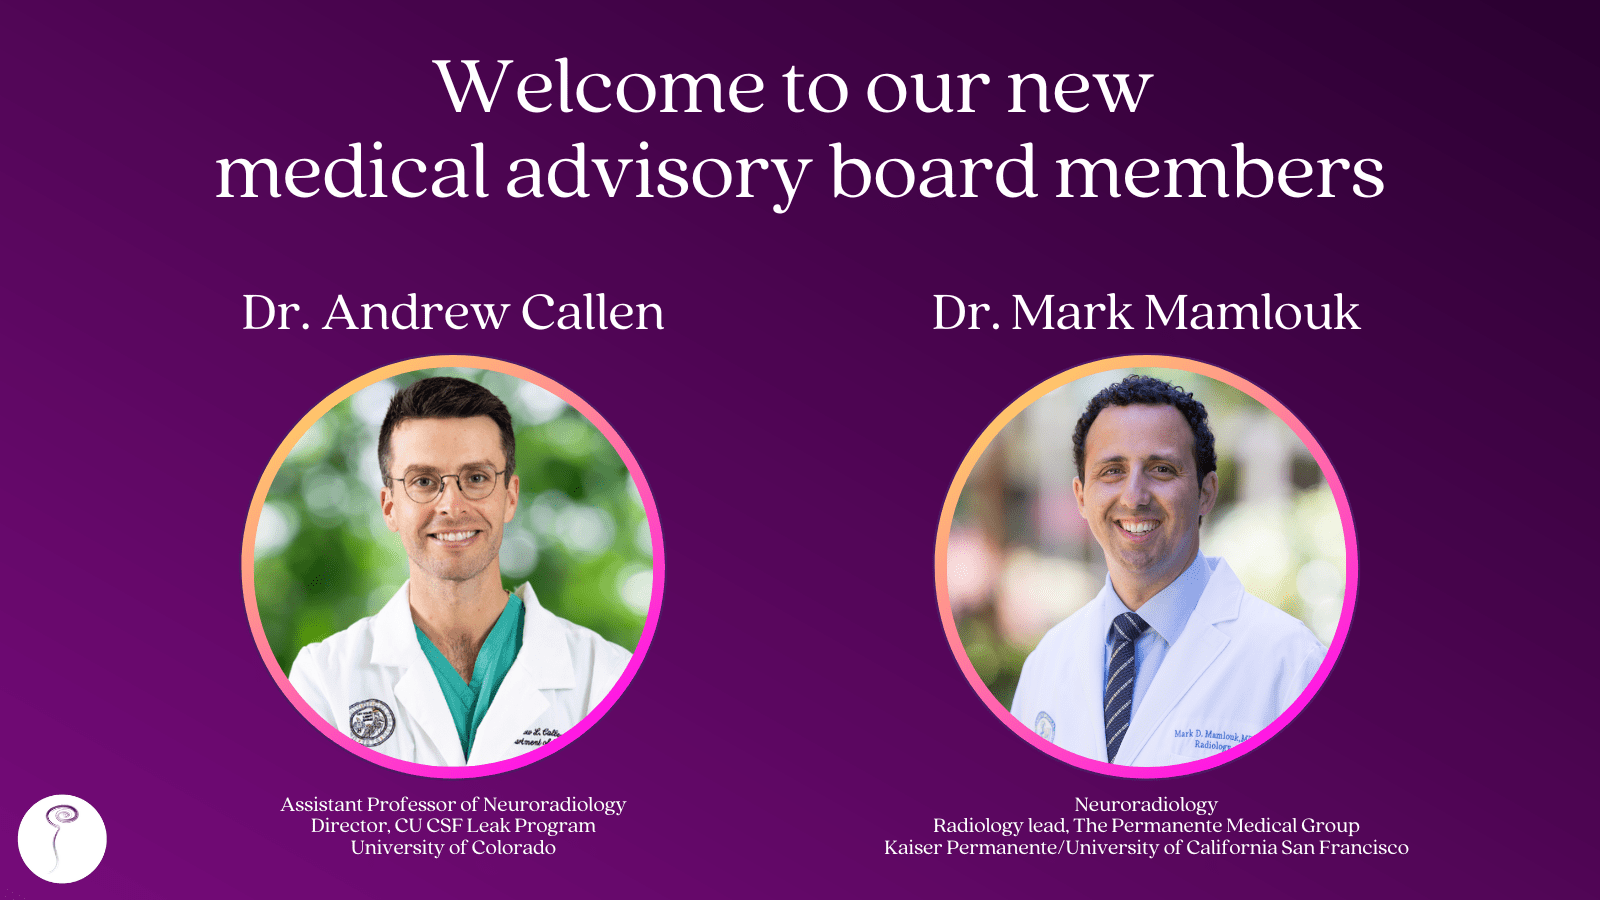 Announcing two new medical advisors